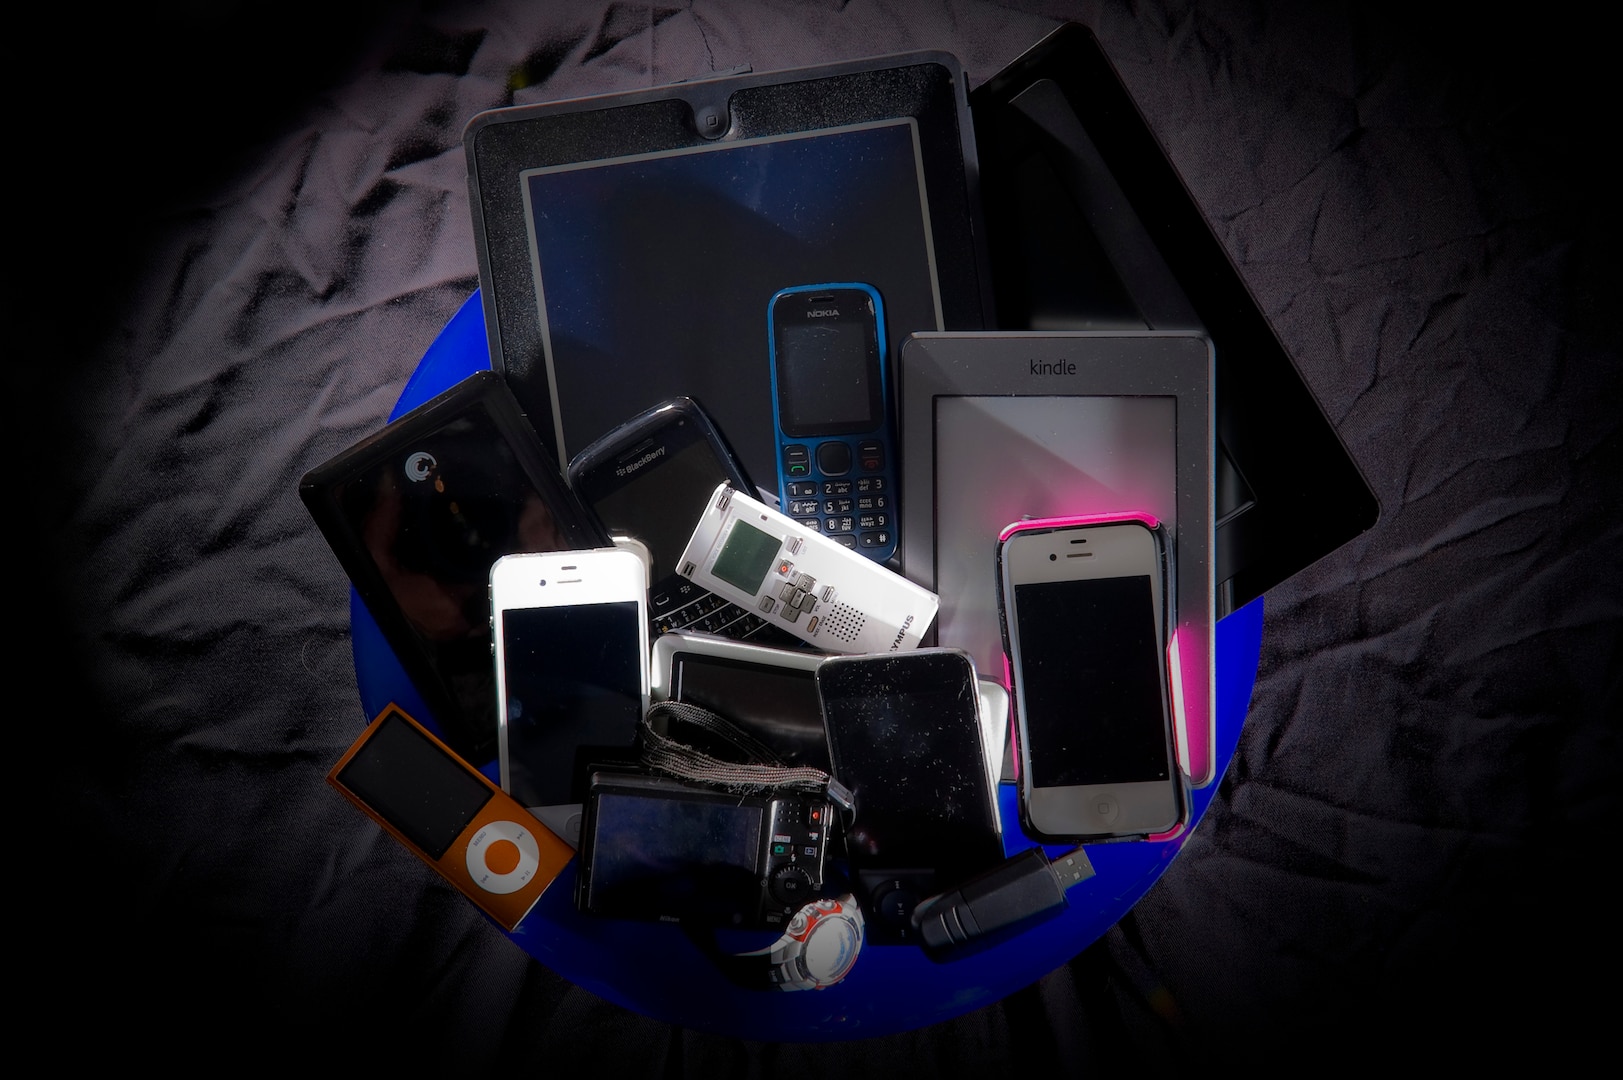 Various personal portable devices including phones and tablets.